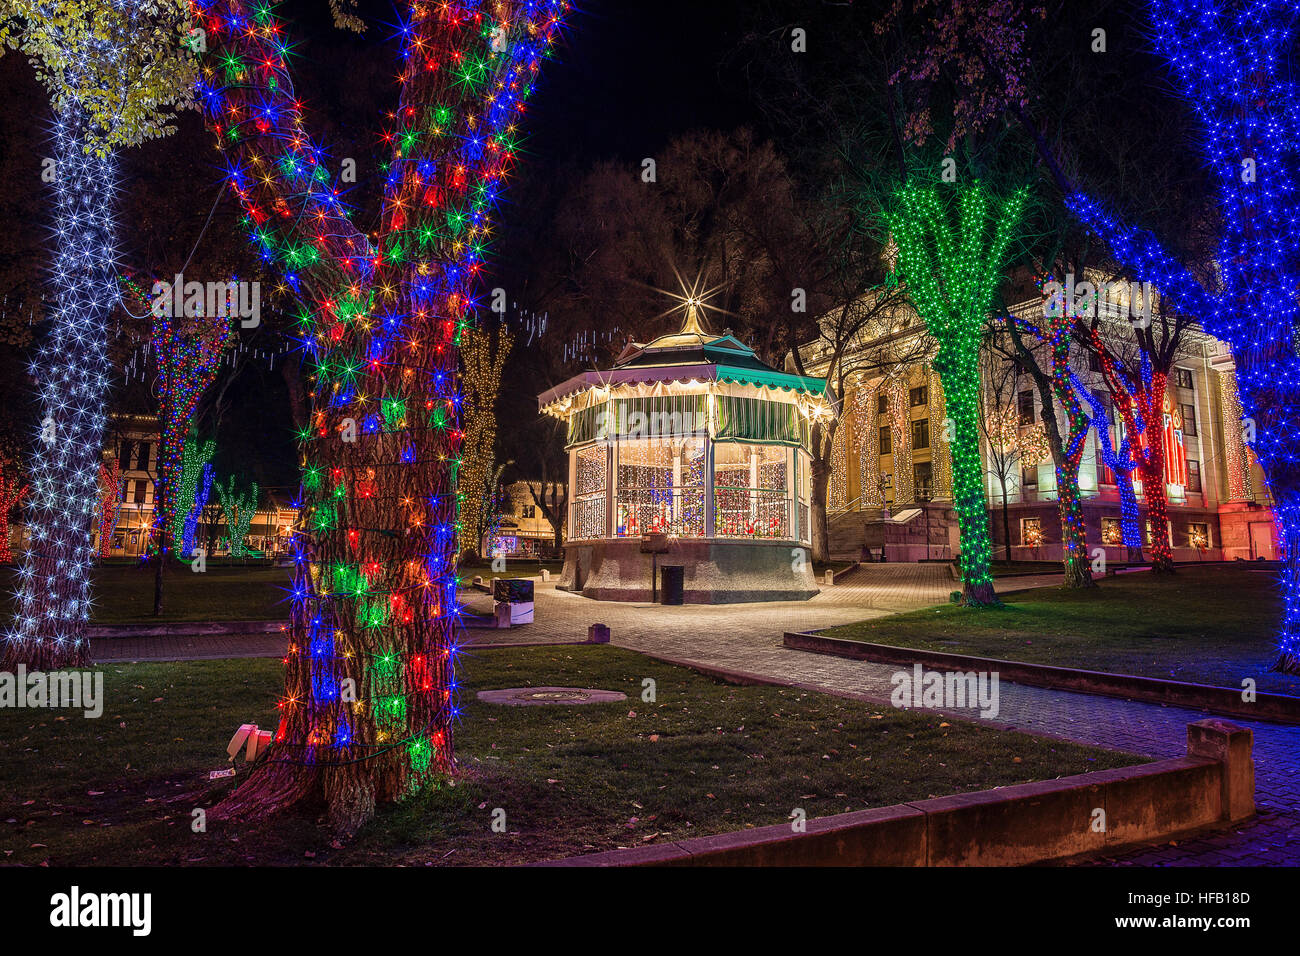 The downtown square and Yavapai County Courthouse decorated with Christmas lights in Prescott, Arizona Stock Photo